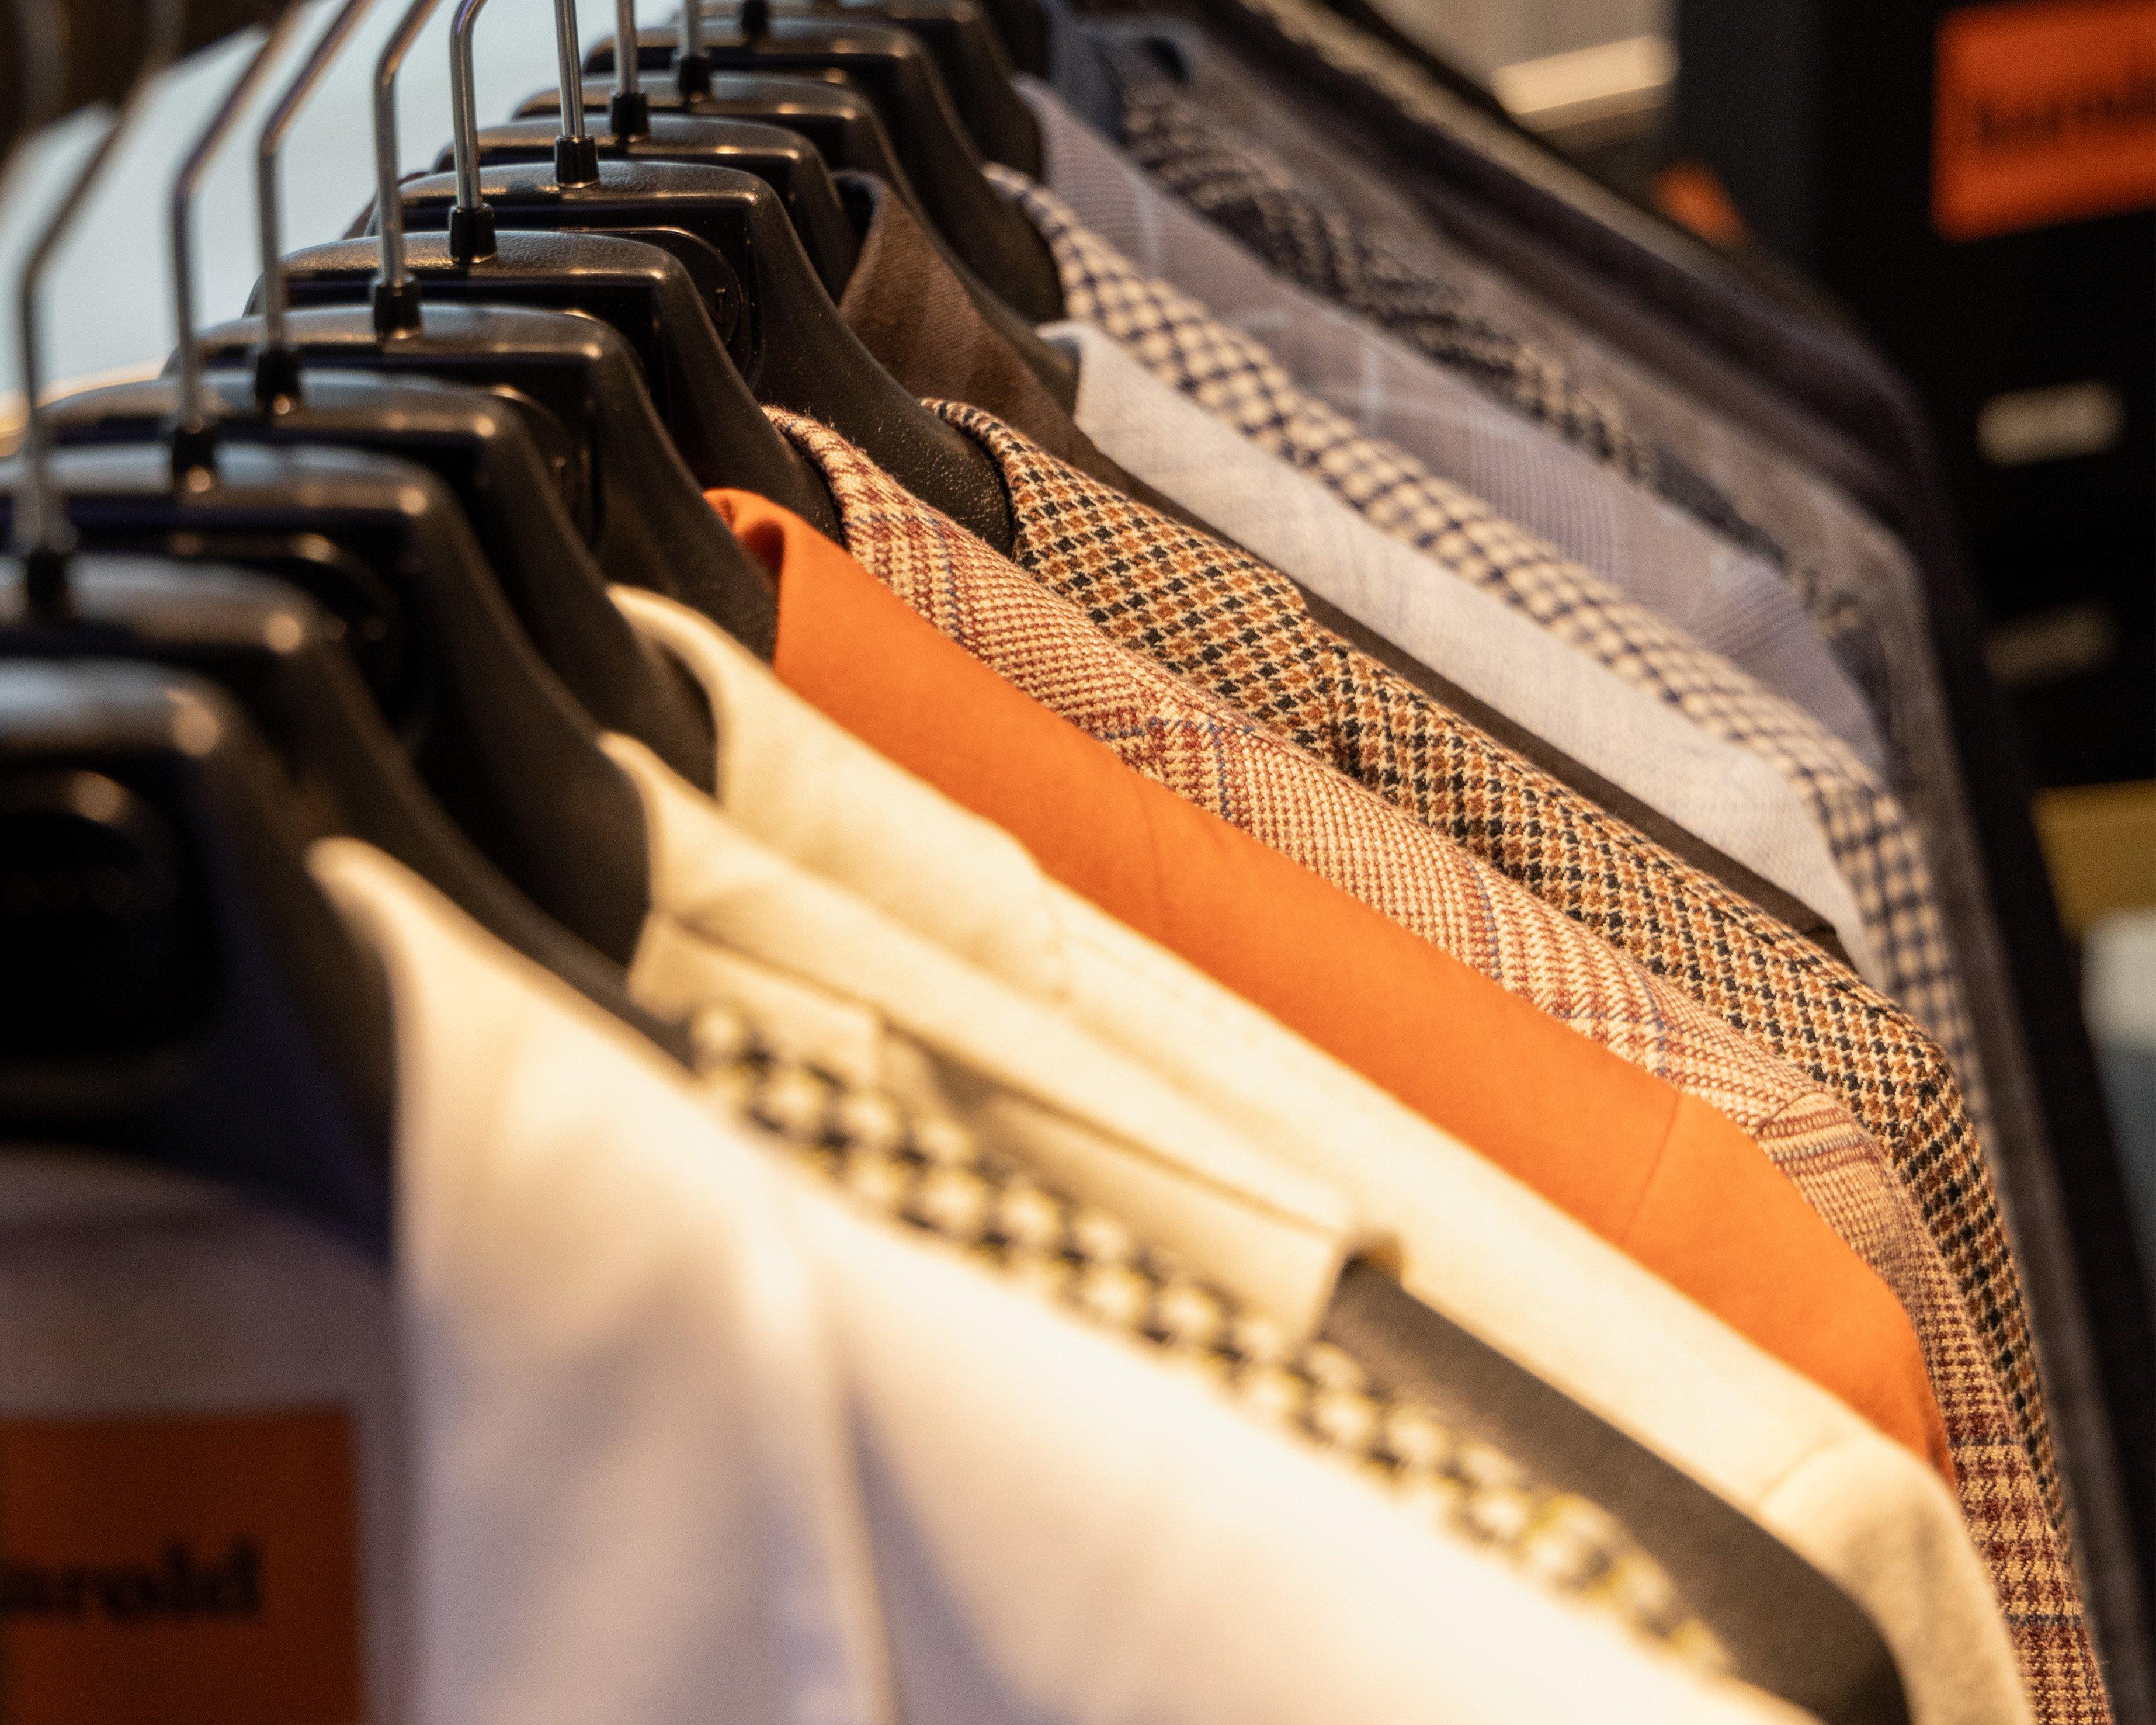 A rack of men's shirts and ties hanging on a rack